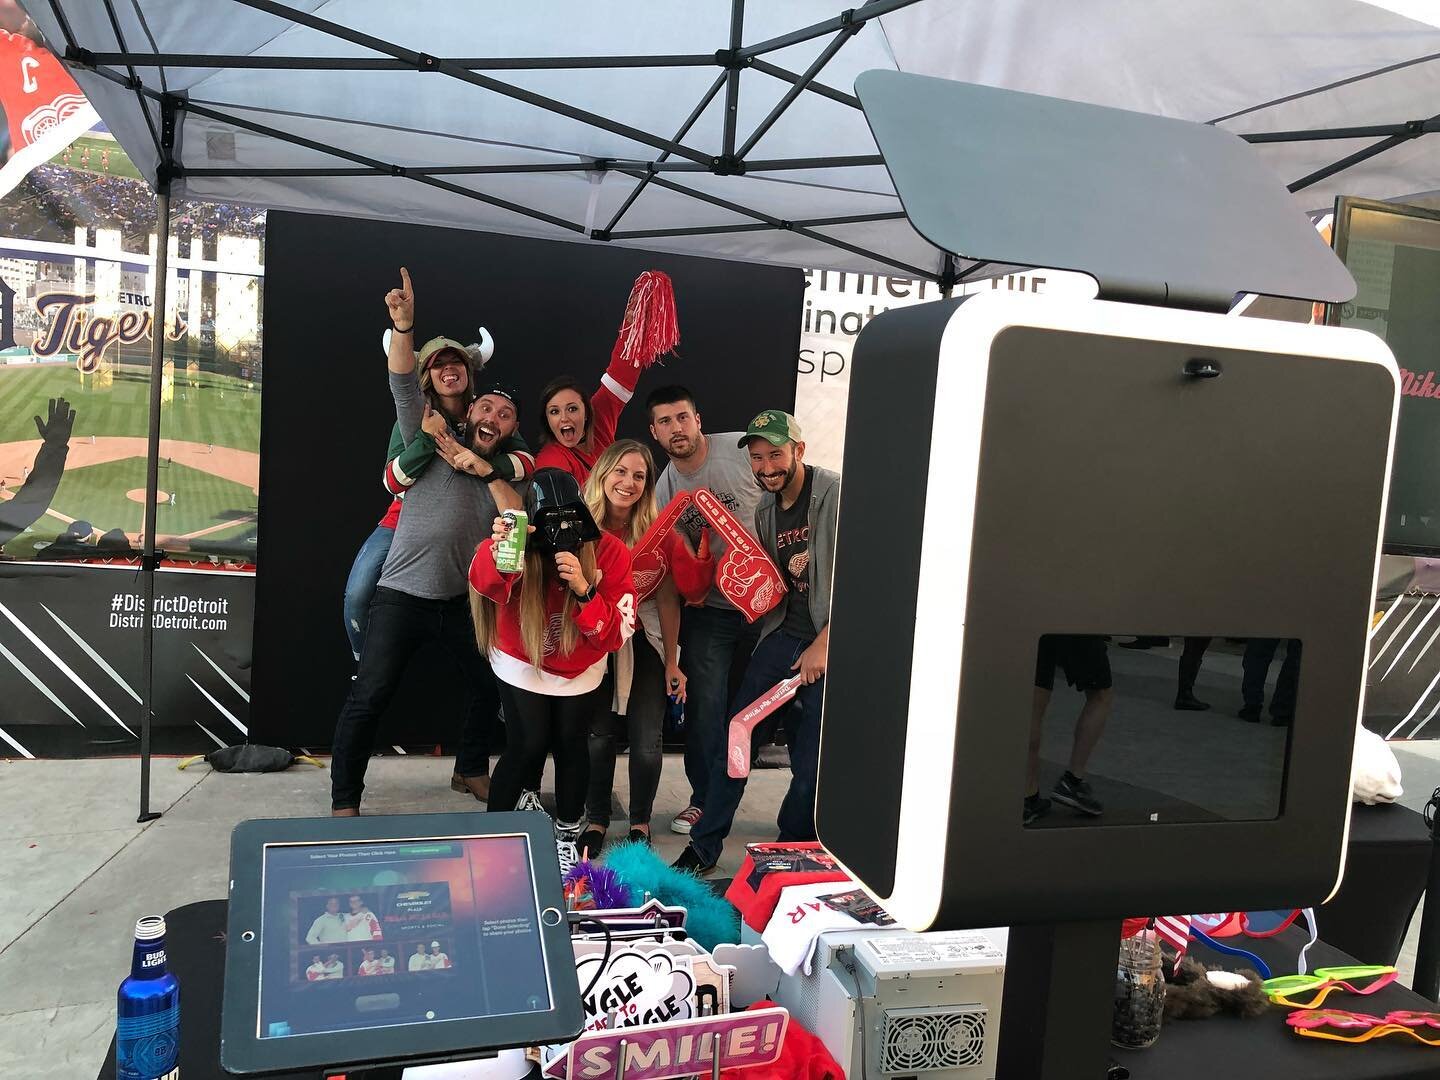 We had a blast bringing our photo activation to the Detroit Red Wings game! From fans decked out in Red Wings gear to the team's iconic logo, we captured it all. Thanks for having us, Detroit! 🏒🔴 #RedWings #HockeySeason #PhotoActivation #CaptureThe